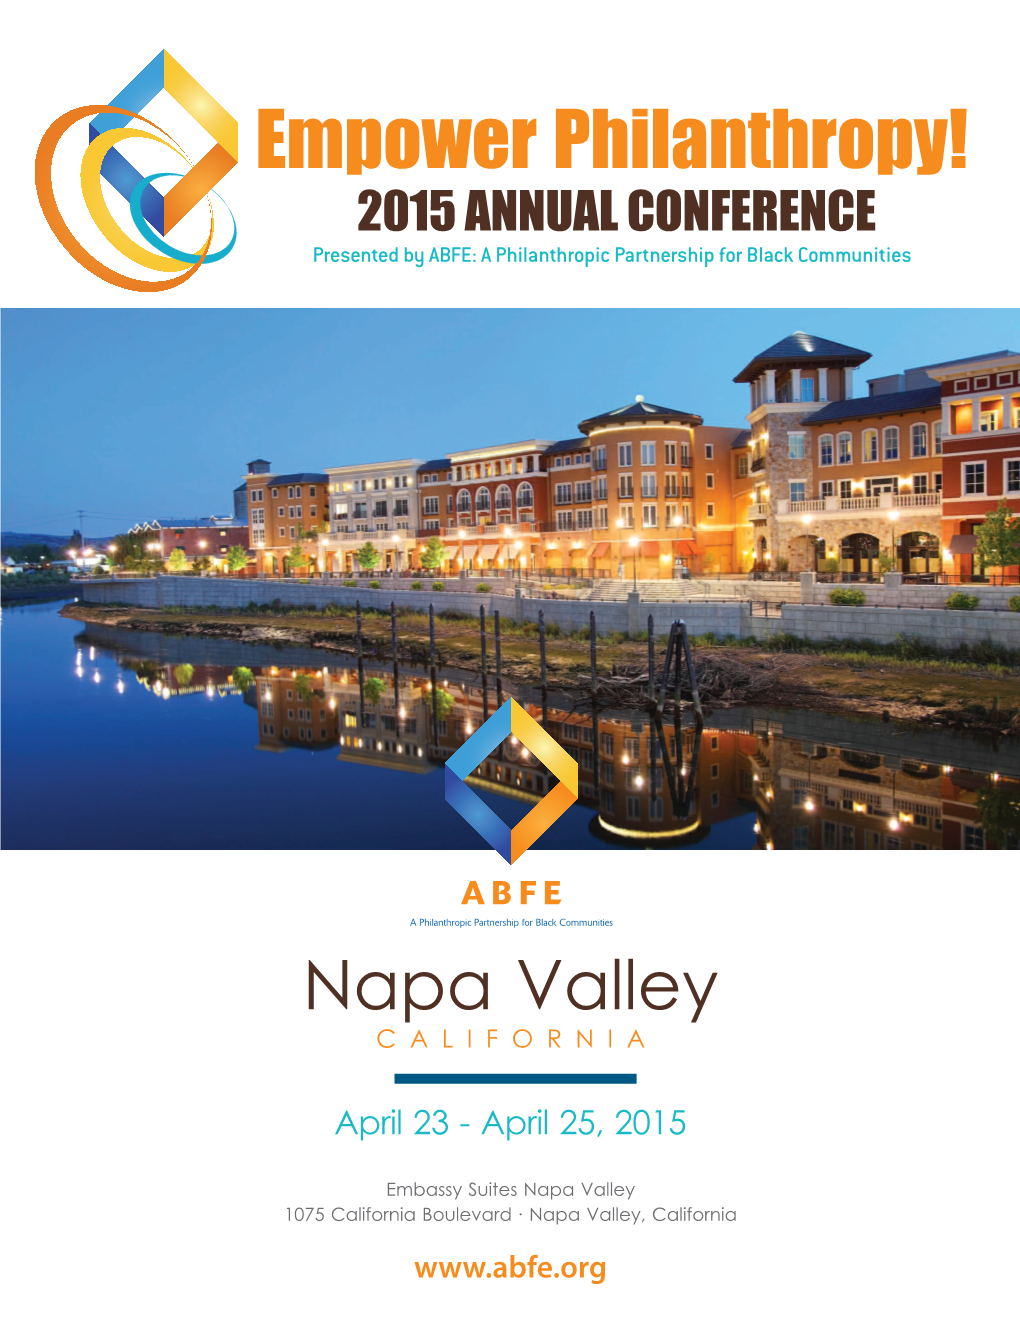 Abfe Philanthropy 6 2015 Conference Schedule At-A-Glance